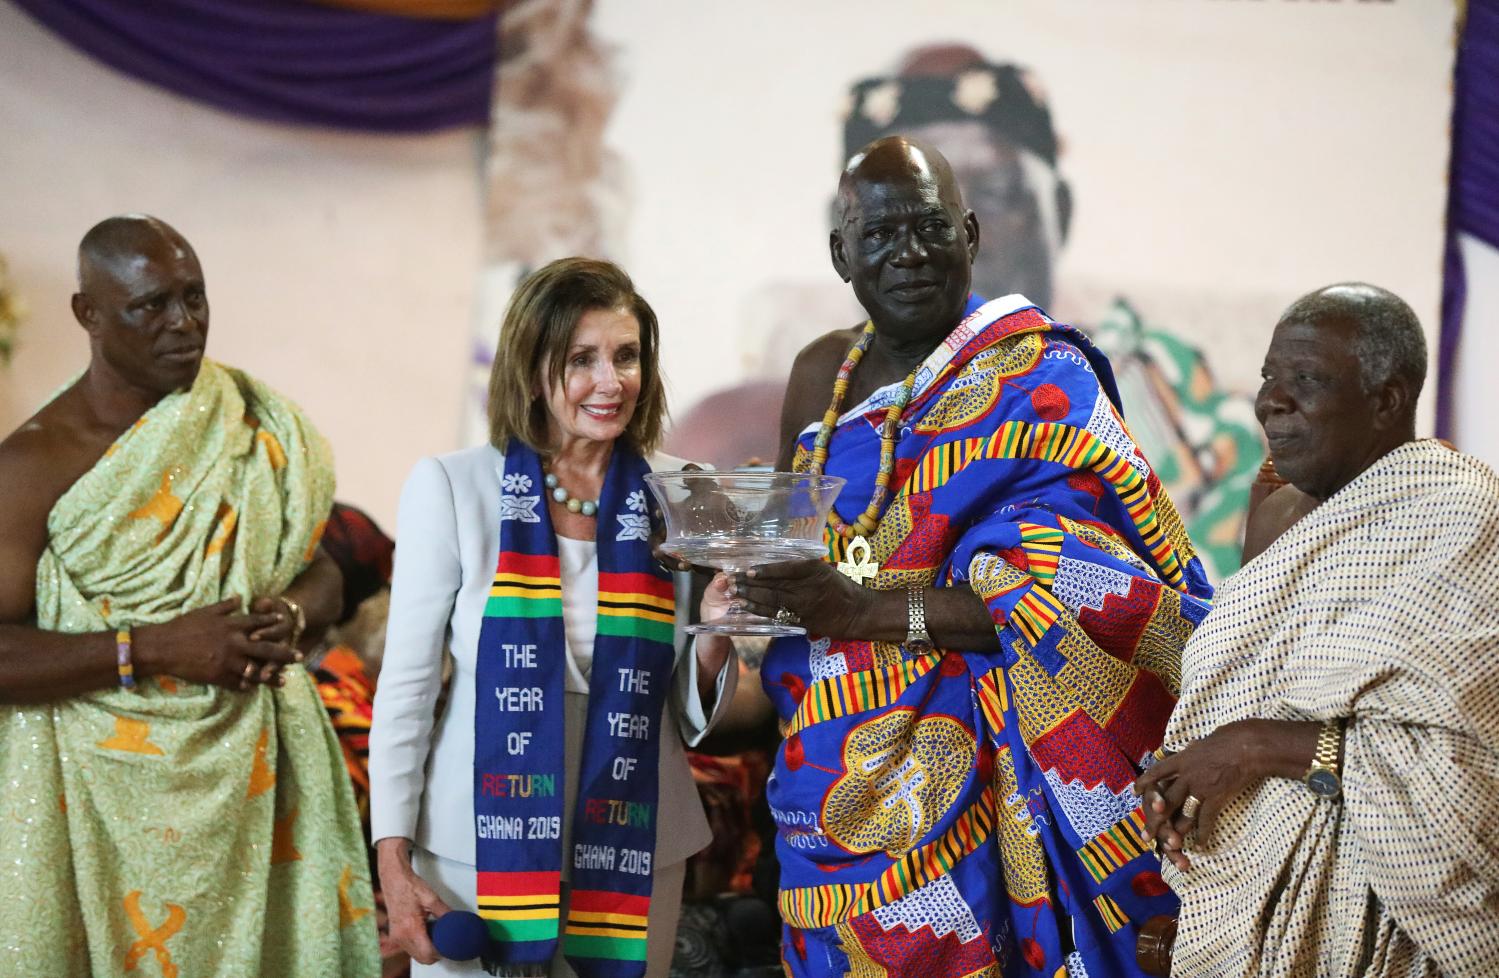 U.S. Speaker of the House Nancy Pelosi poses for a photograph after presenting a gift to Paramount Chief of Cape Coast traditional area, Osabarima Kwesi Atta II, during her visit to a palace used by the Chief after her tour at the Cape Coast Castle which was used as a trading post from where slaves would be taken to America, in Ghana July 30, 2019. REUTERS/Siphiwe Sibeko - RC14F026AA40